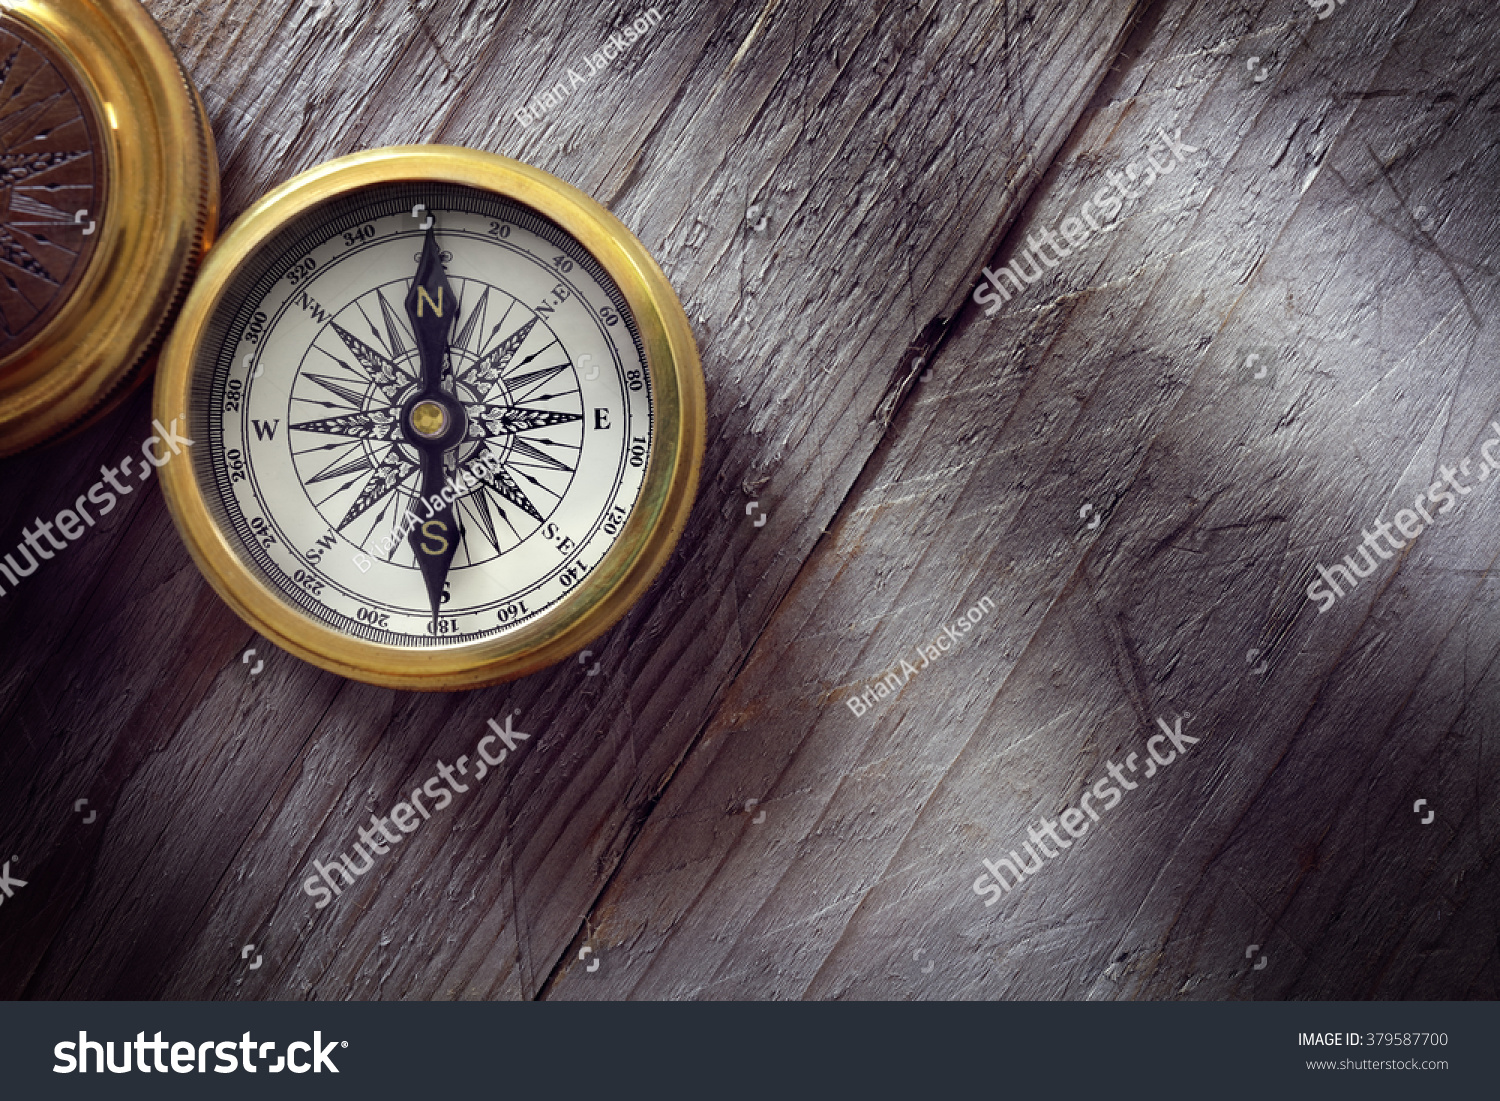 Antique golden compass on wood background concept for direction, travel, guidance or assistance #379587700